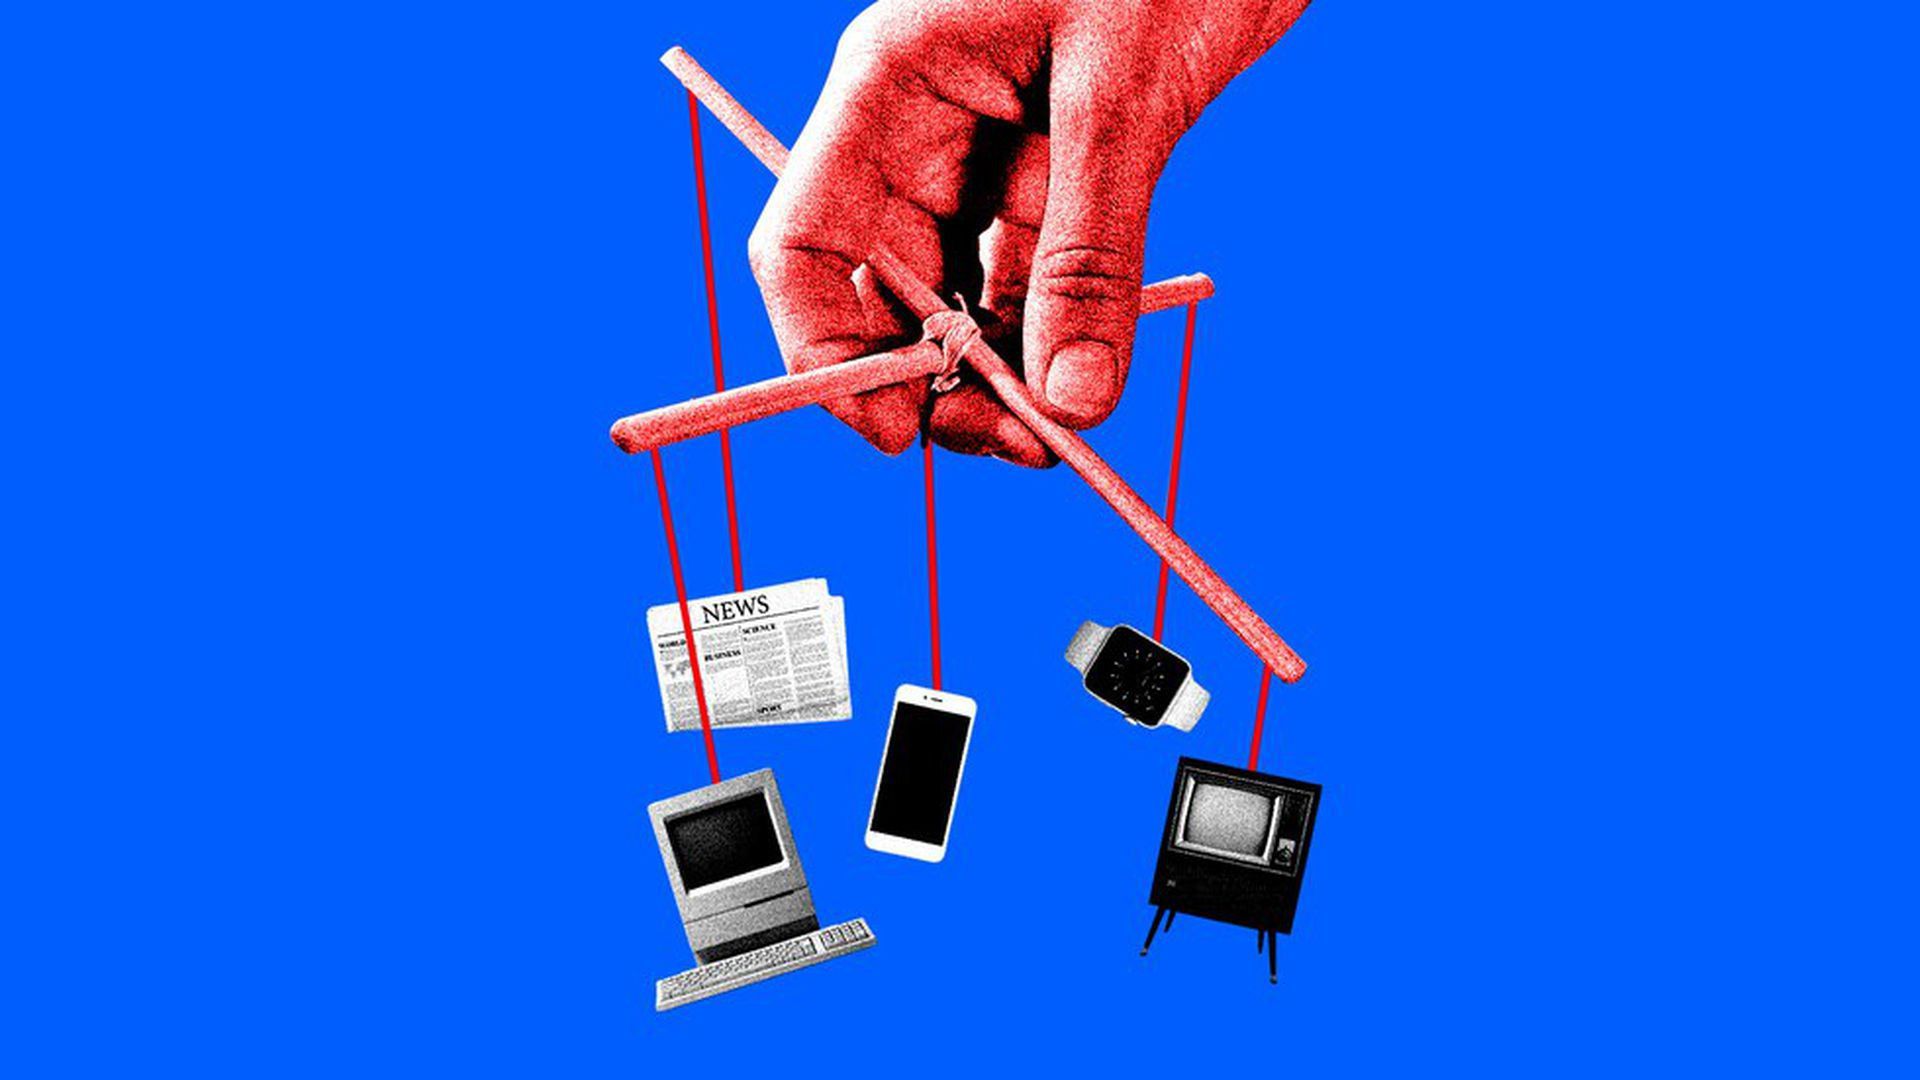 Illustration of a marionette set with tvs and computers attached